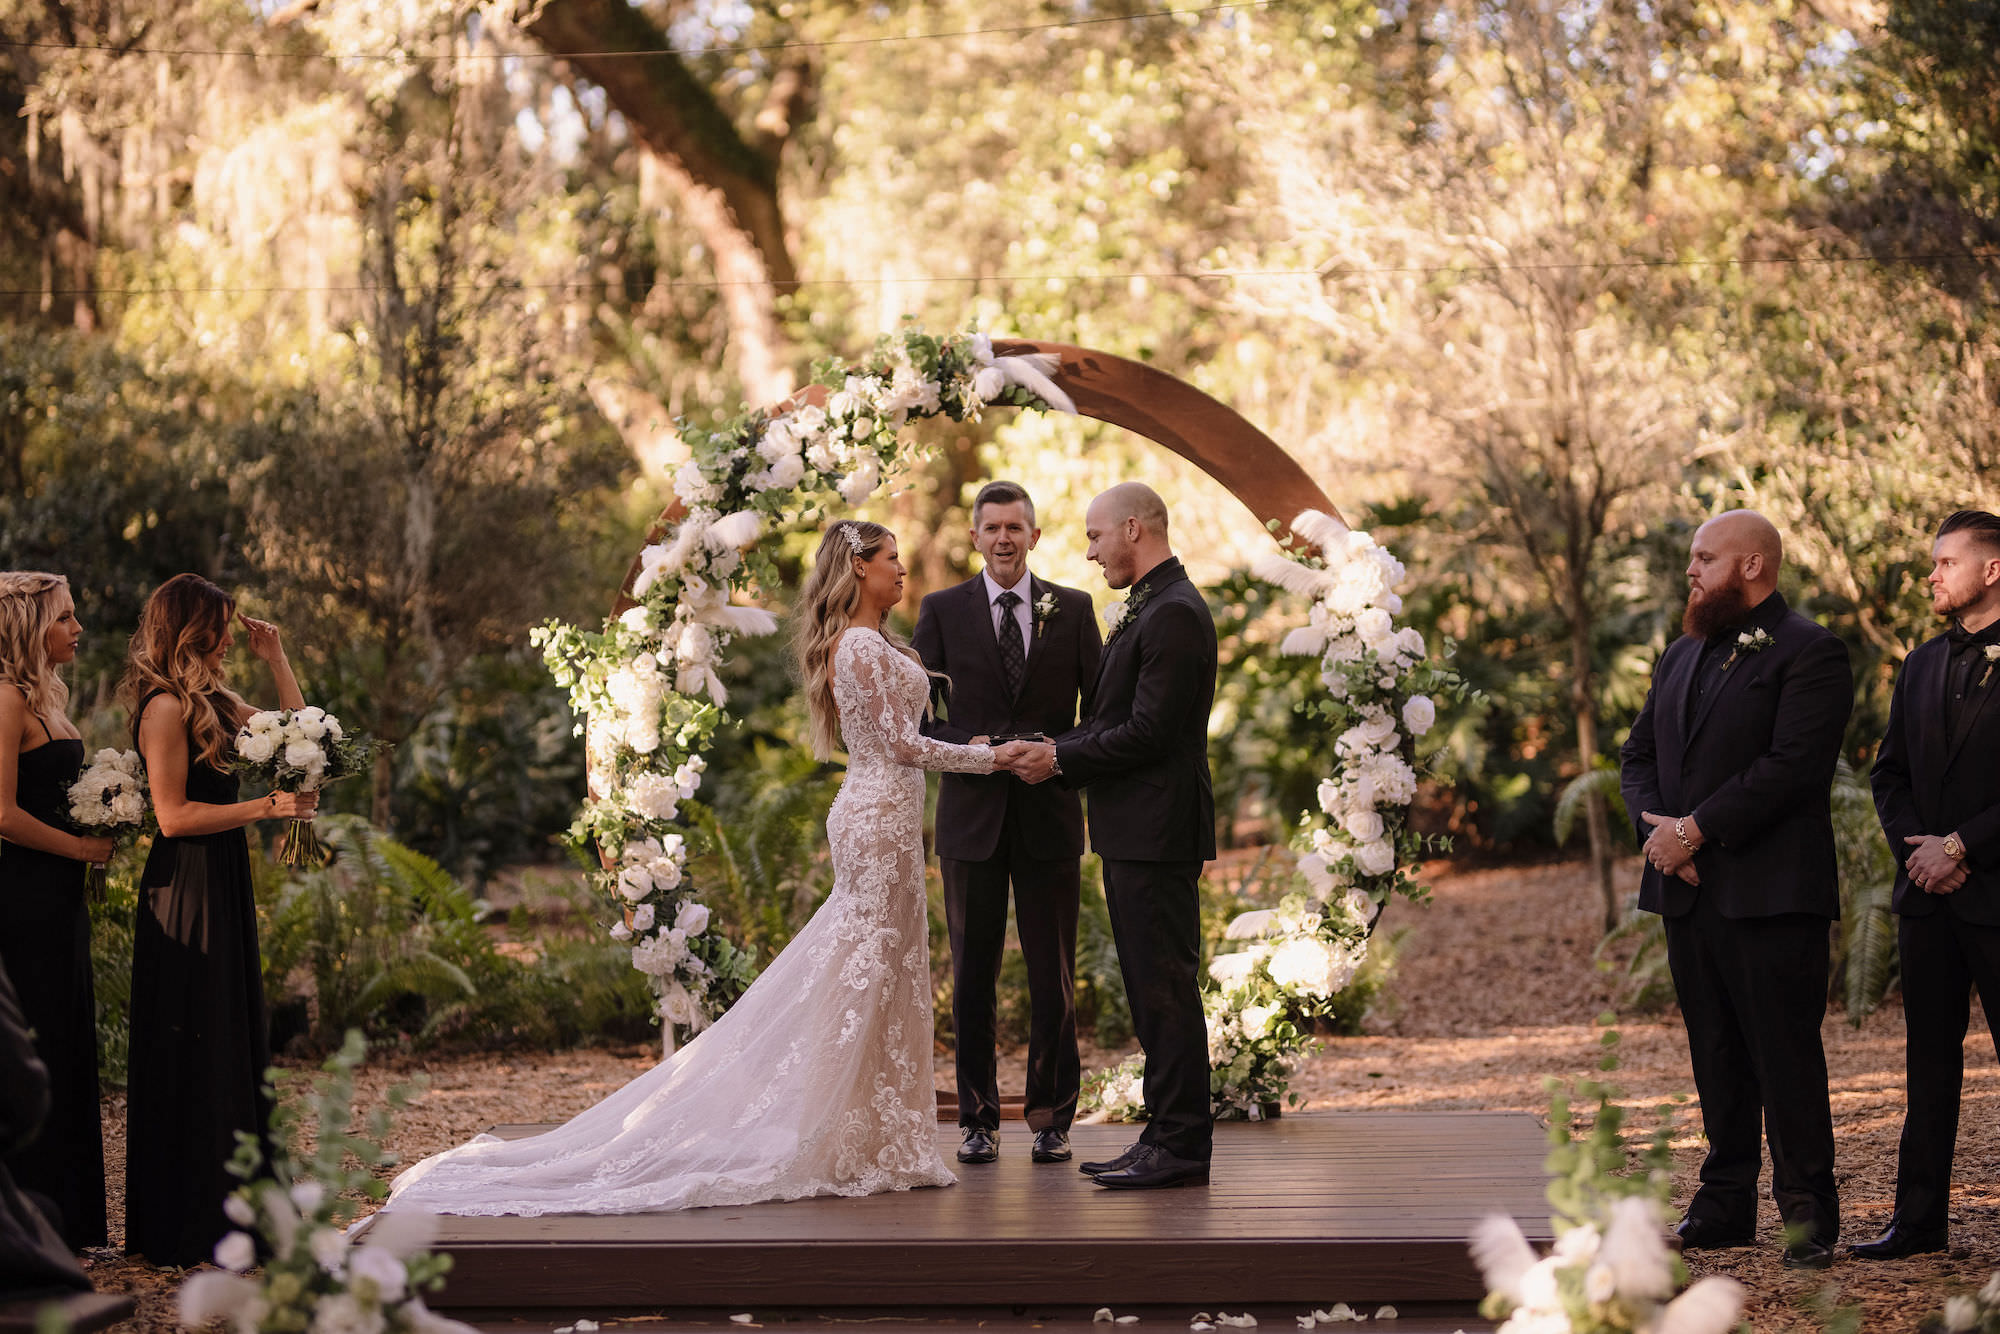 Bride and Groom Reading Wedding Vows with Circular Wooden Arch and White Flowers | Tampa Bay Wedding Venue Cross Creek Ranch